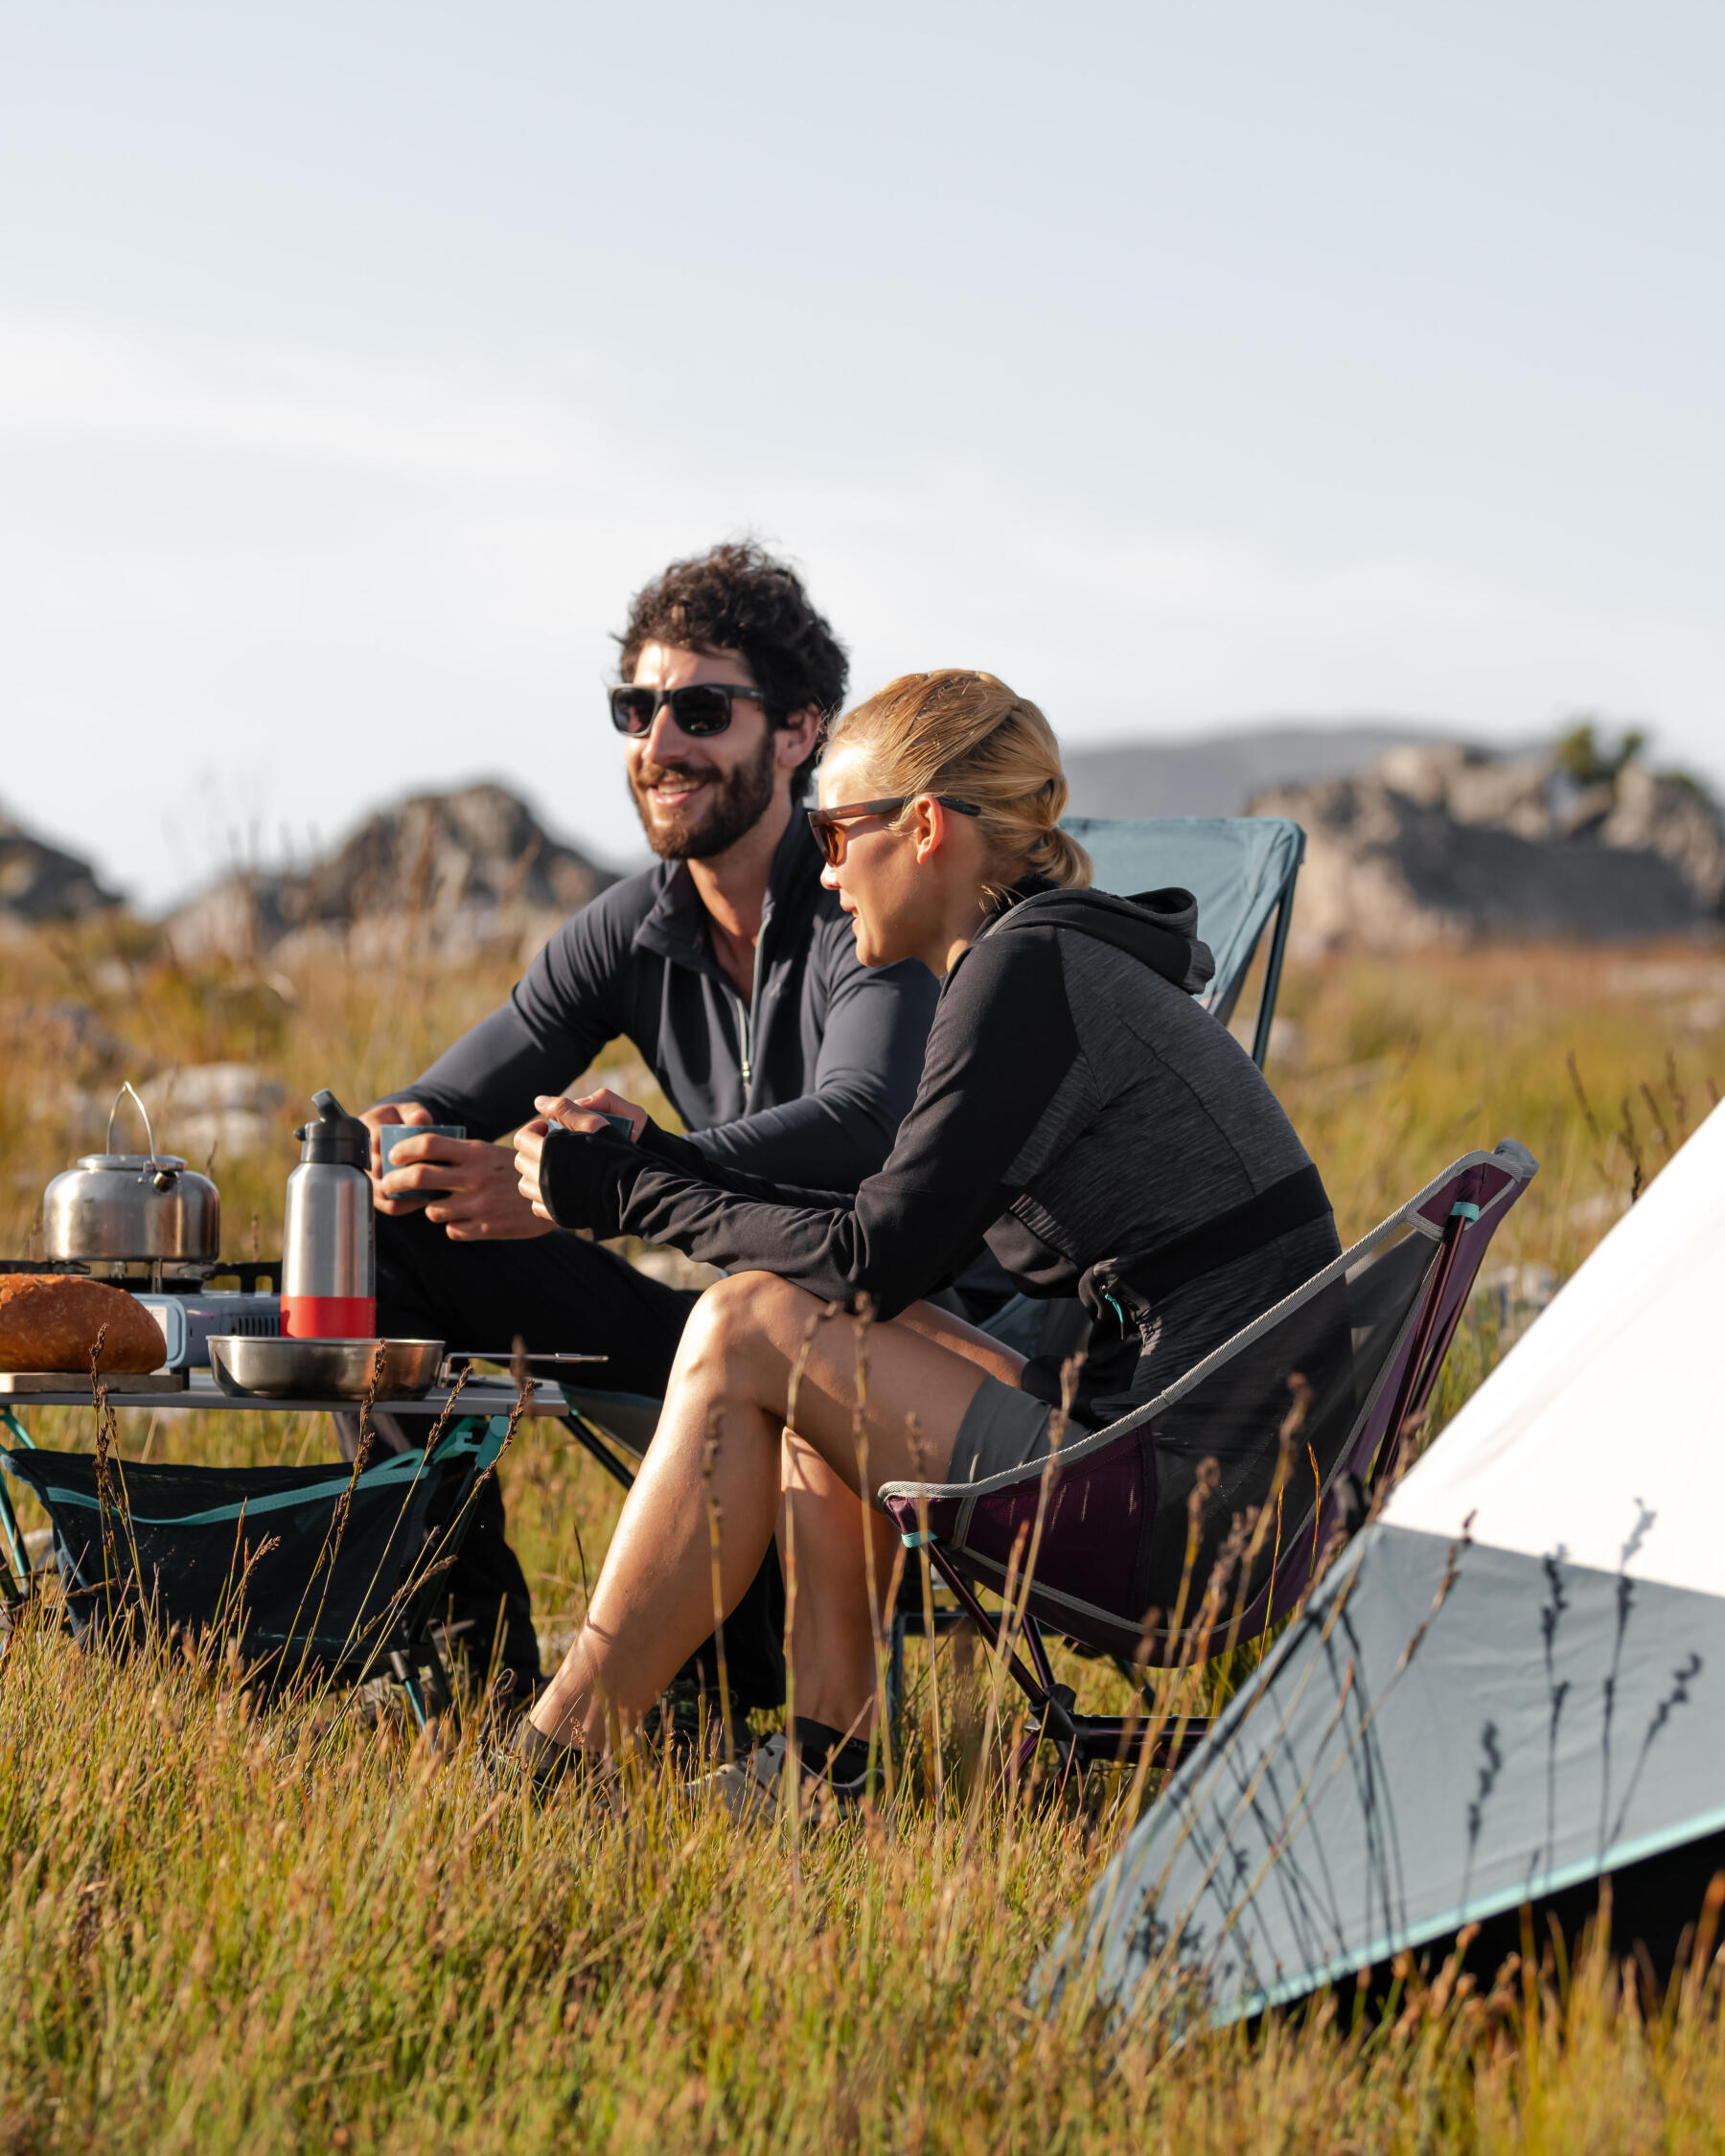 Camping equipment: tips on what to bring